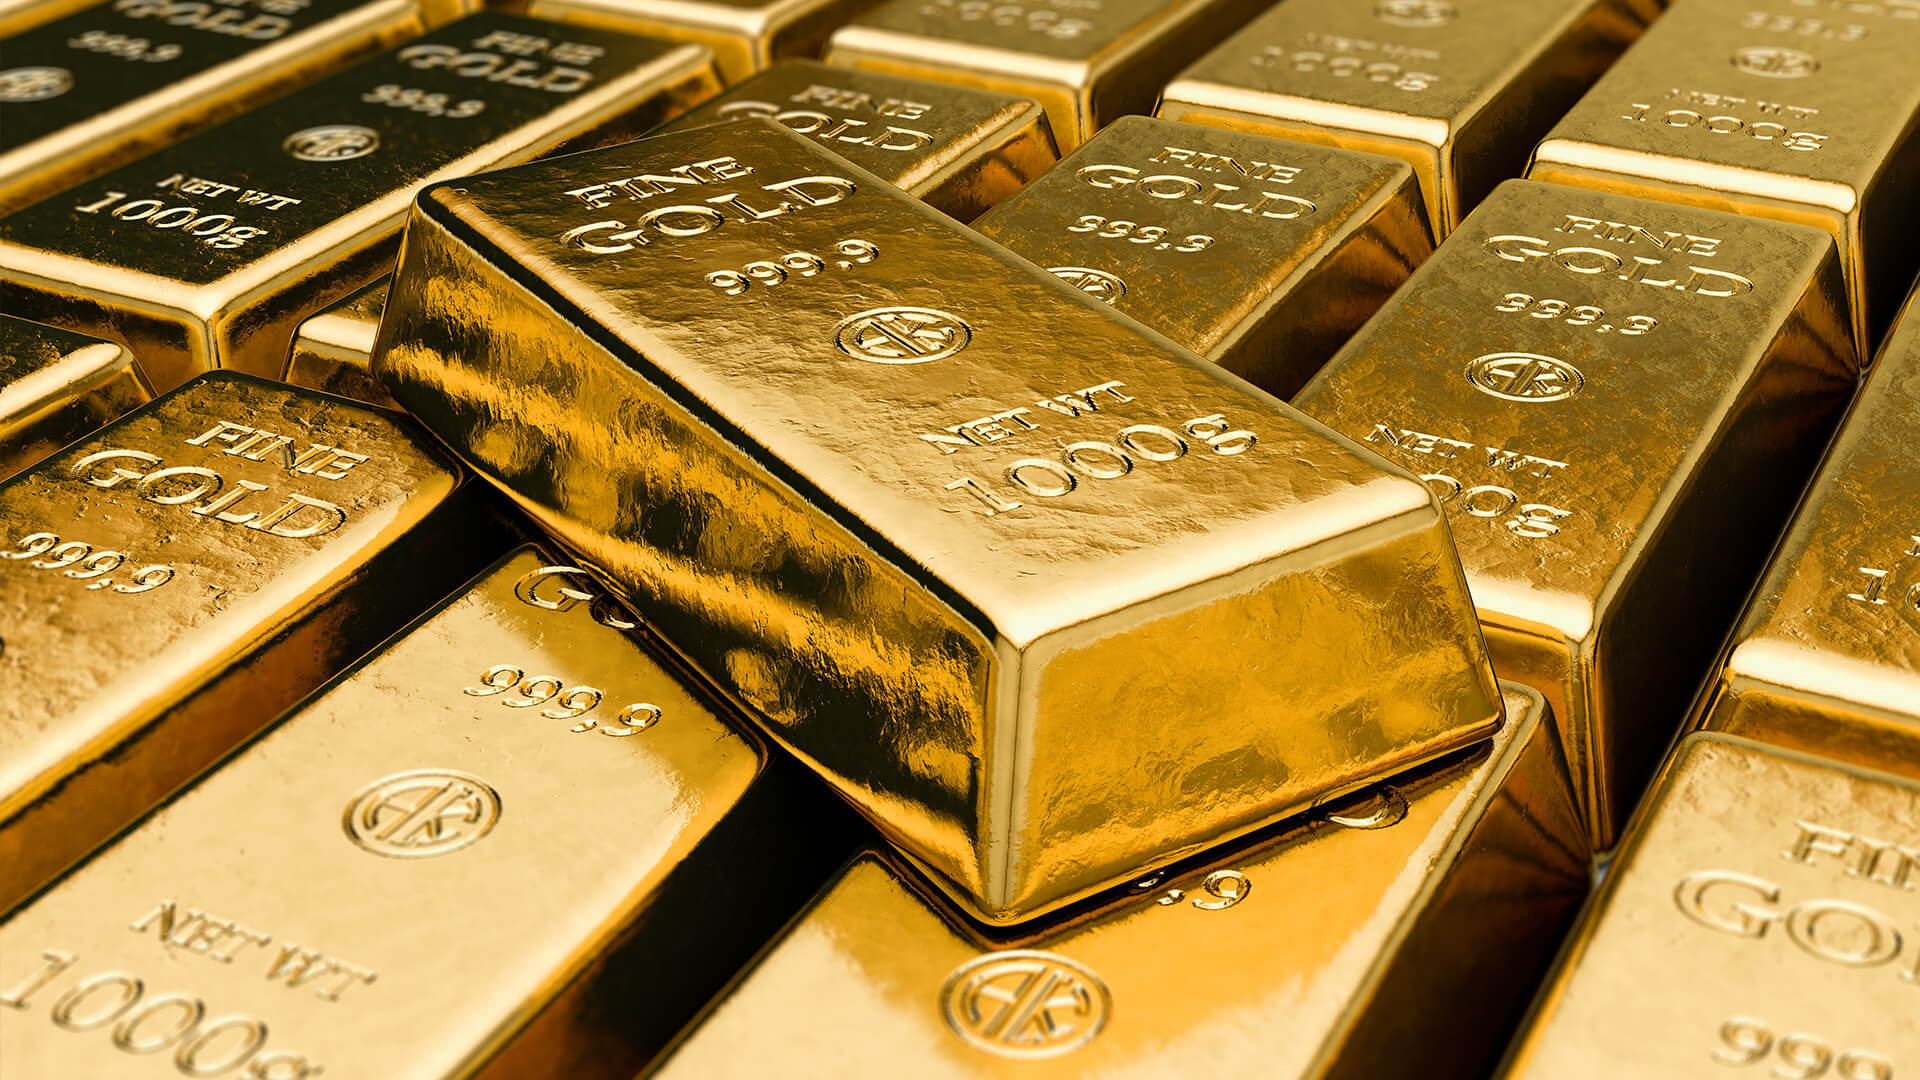 5 Reasons to Add Precious Metals to Your Investment Portfolio